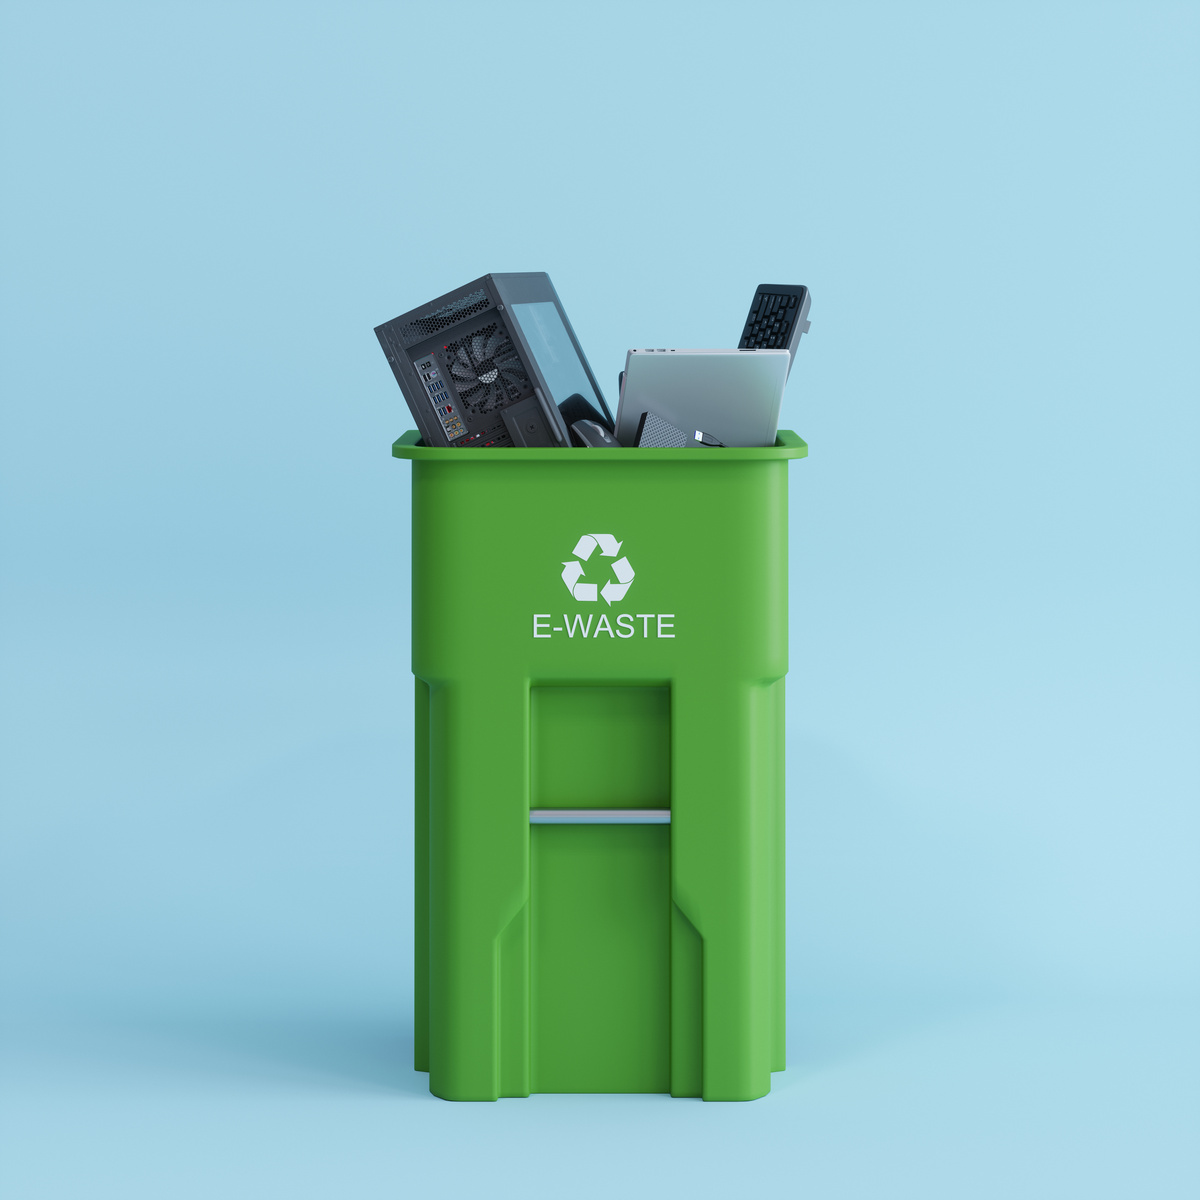 Electronic Wastes Collected In The Green Colored Garbage Bin With E-waste Symbol. Environmental Conservation And Recycle Concept